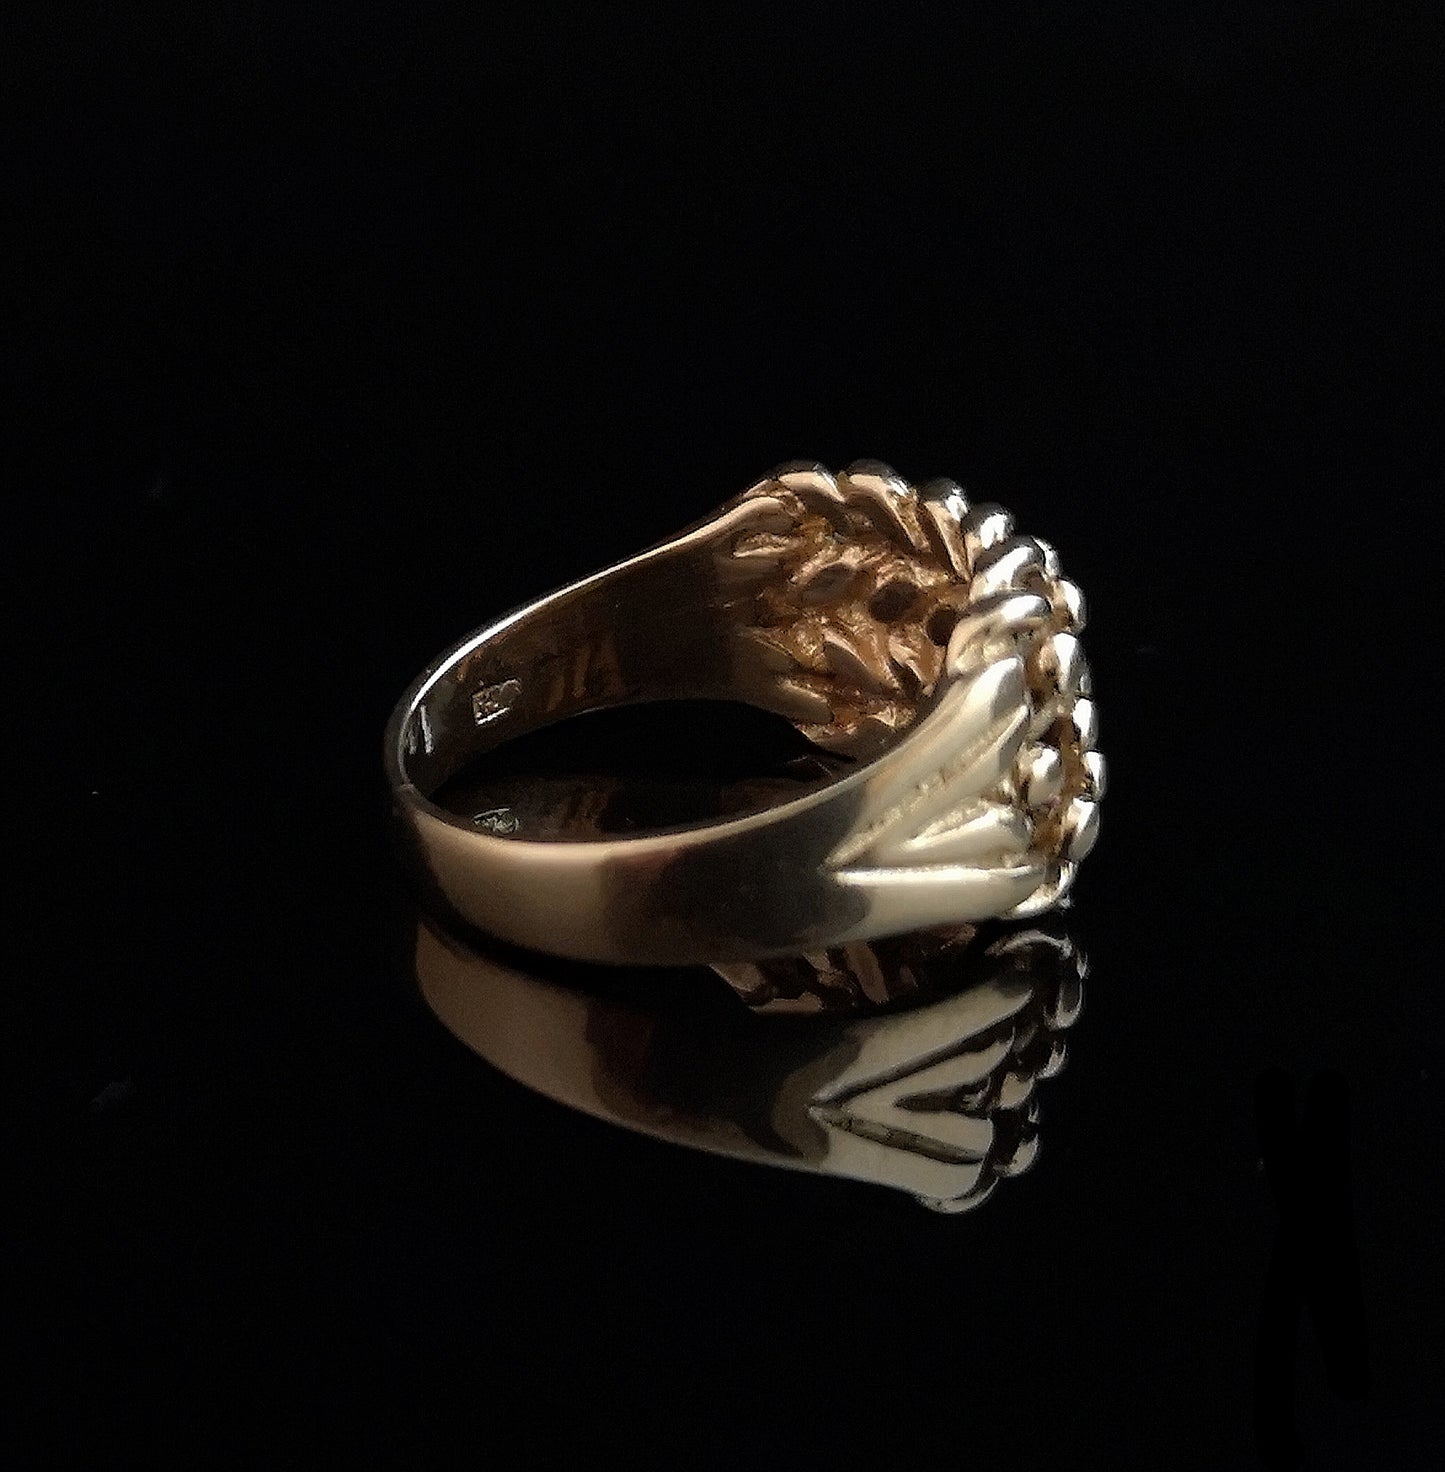 Antique 9ct gold keeper ring, heavy, Edwardian